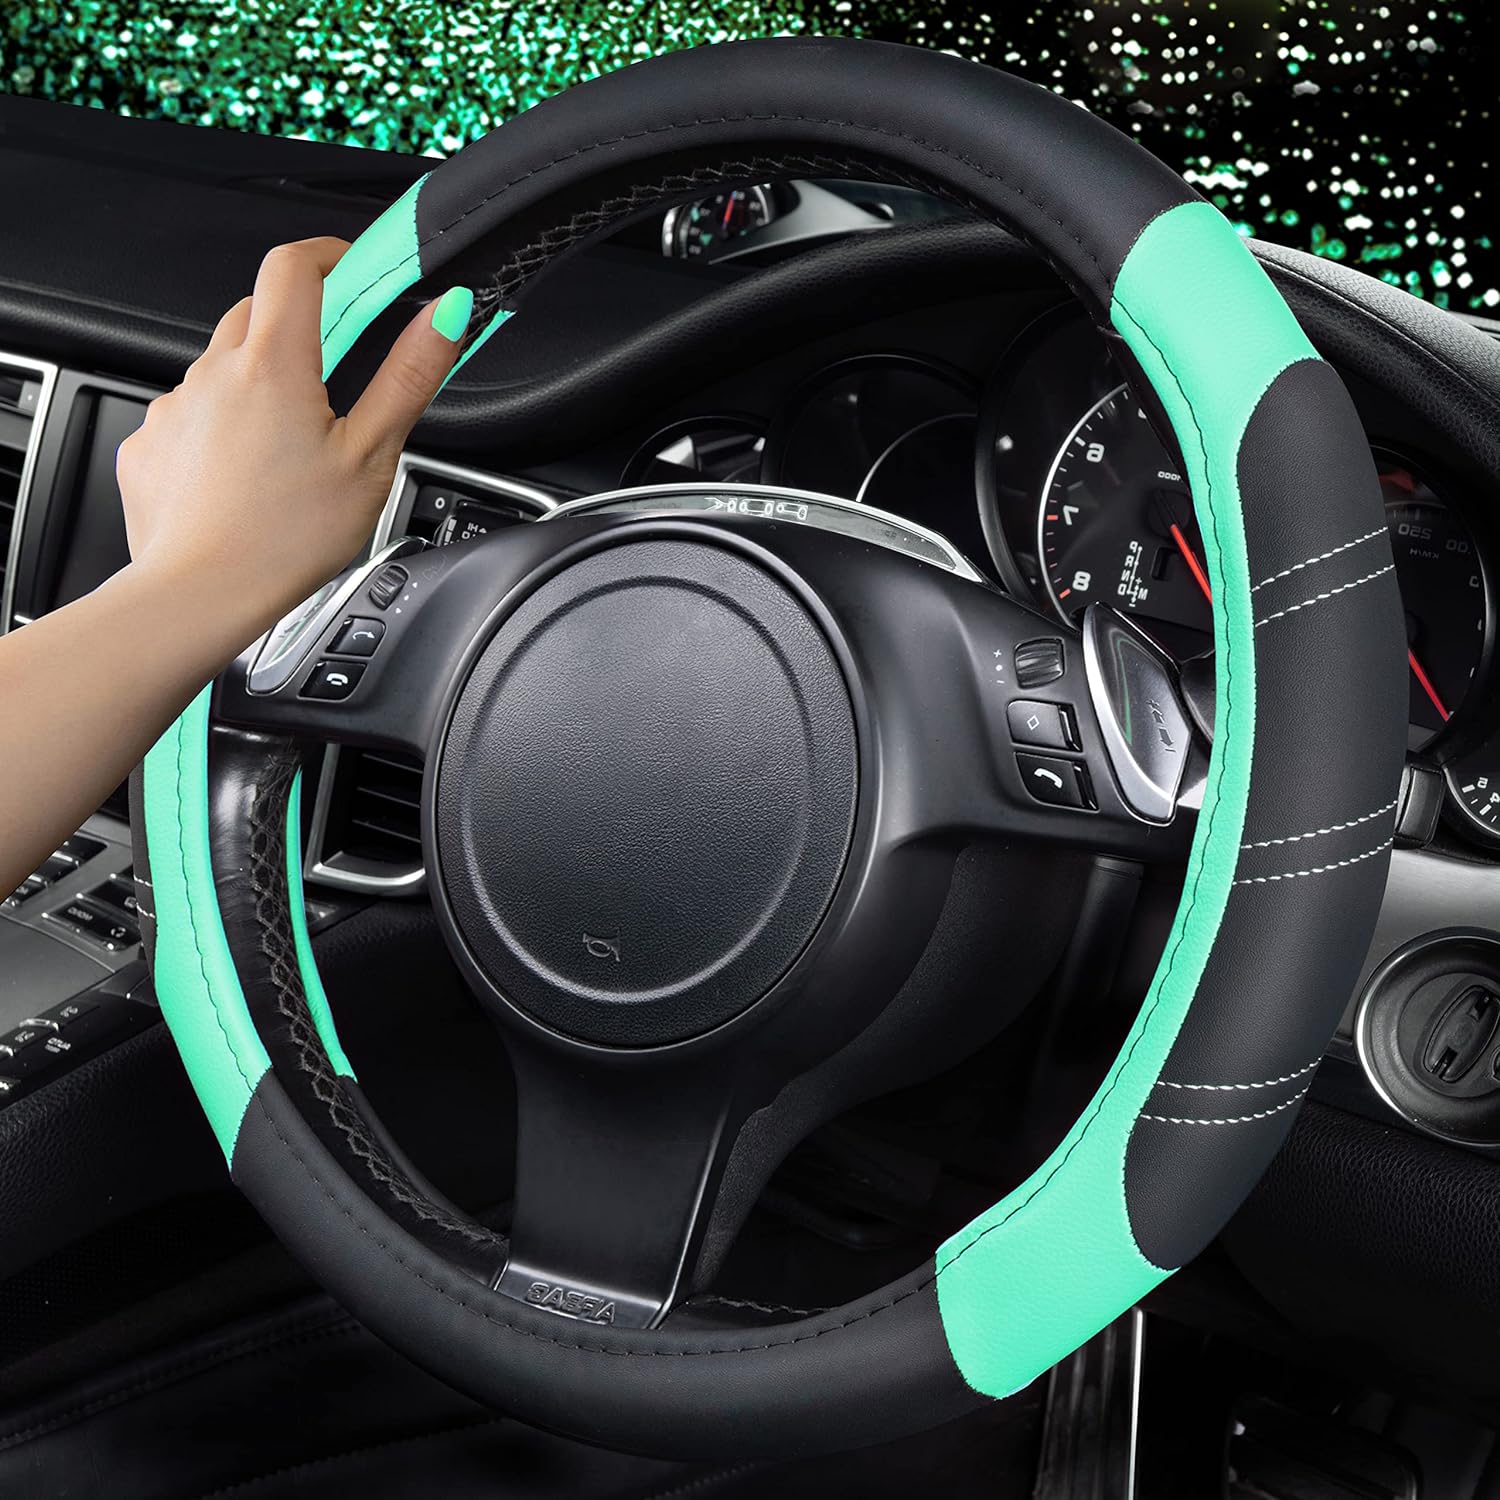 CAR PASS Steering Wheel Cover and Heavy Duty Leather Seat Cover Combo, Waterproof Automotive Seat Cover Fit for Most Sedans, SUV, Pick-Up, Truck.Black and Mint